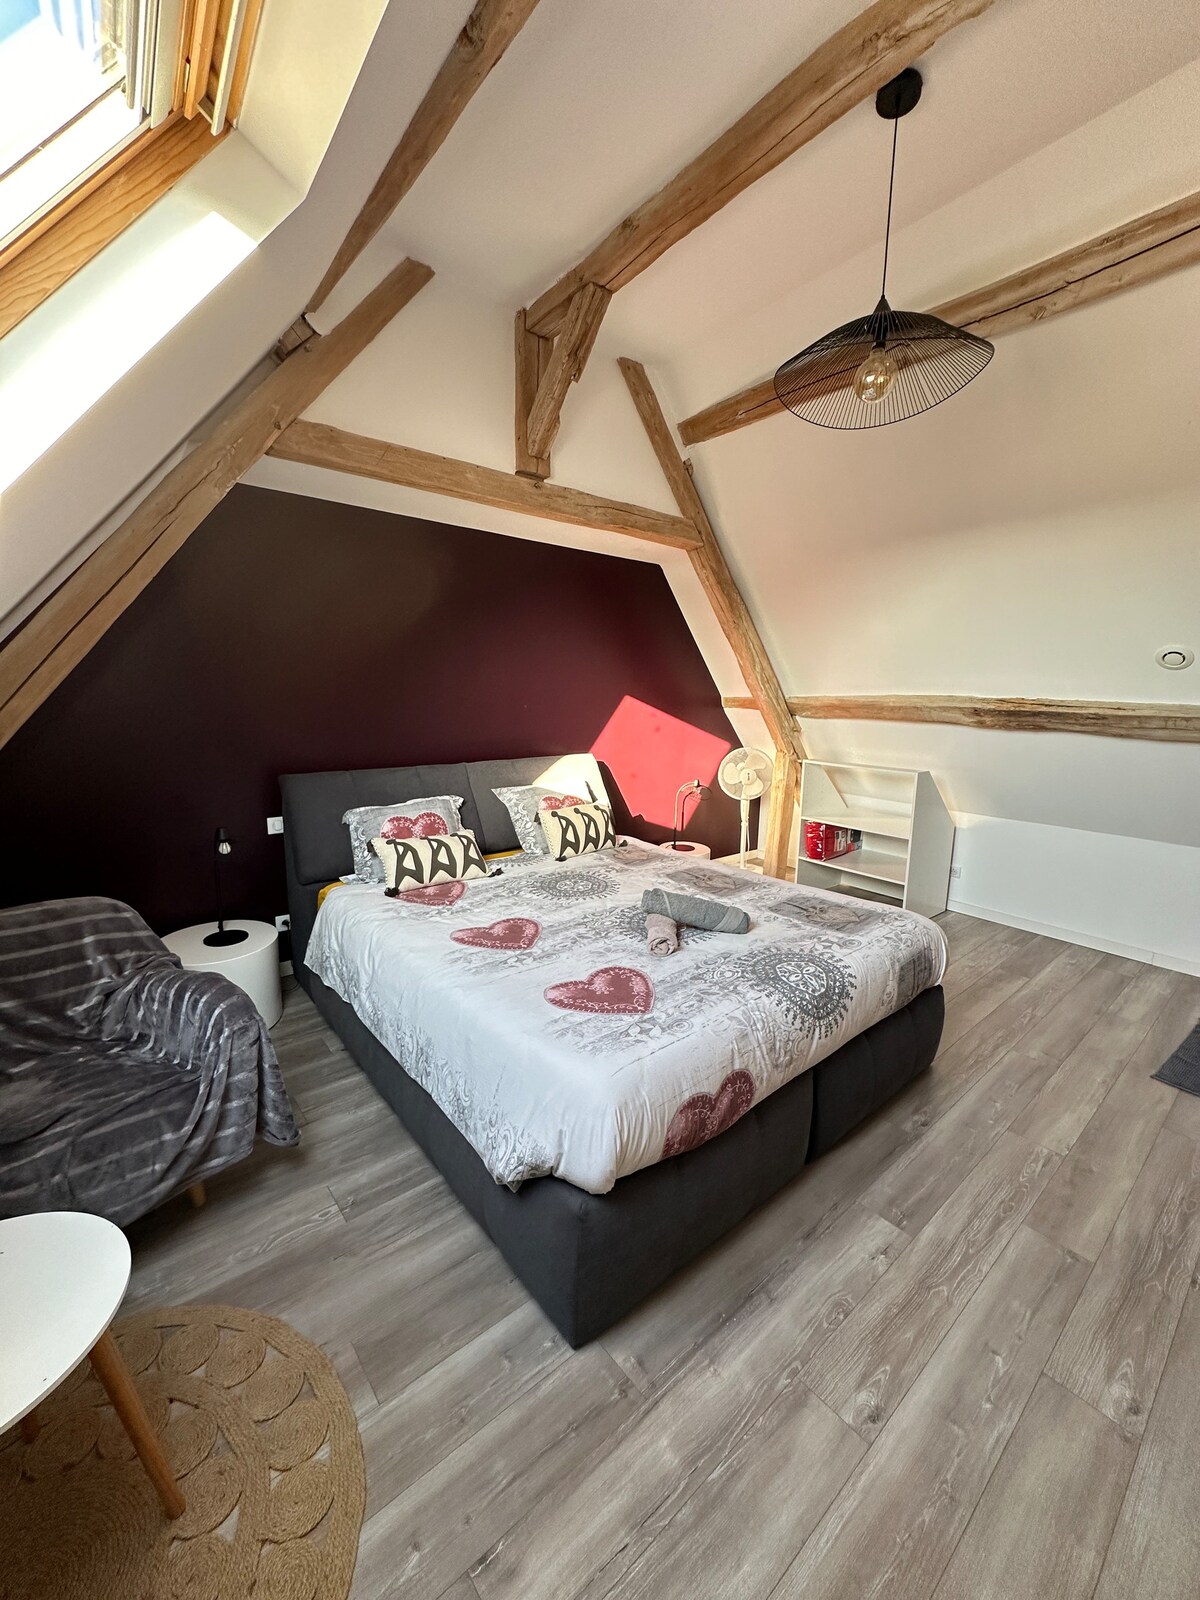 Two characterful guest rooms in the countryside